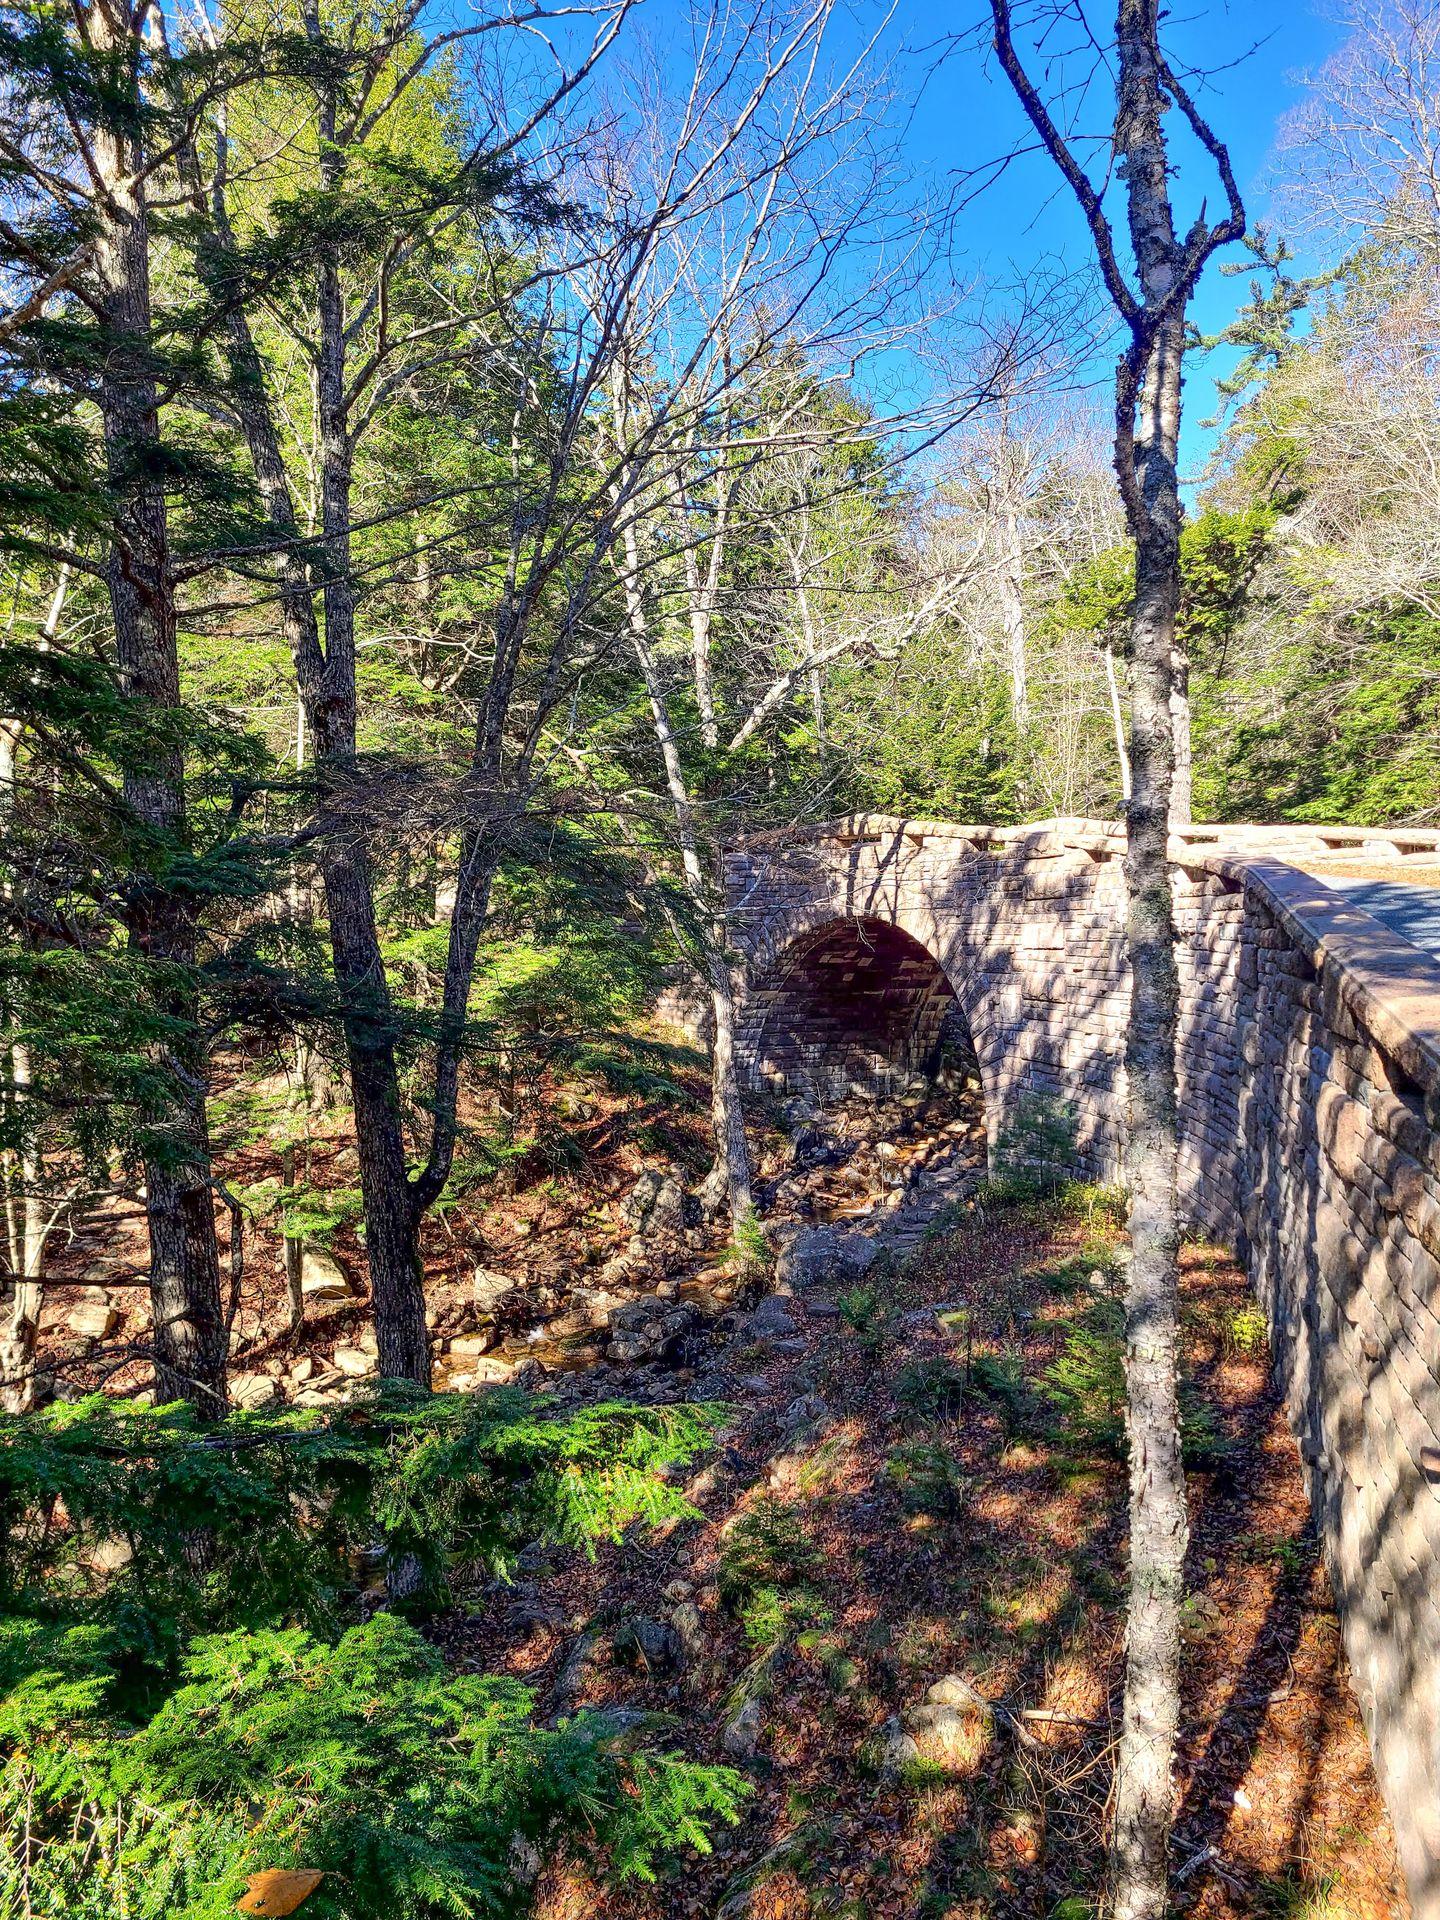 A stone bridge on the Carriage Roads with trees next to the road.